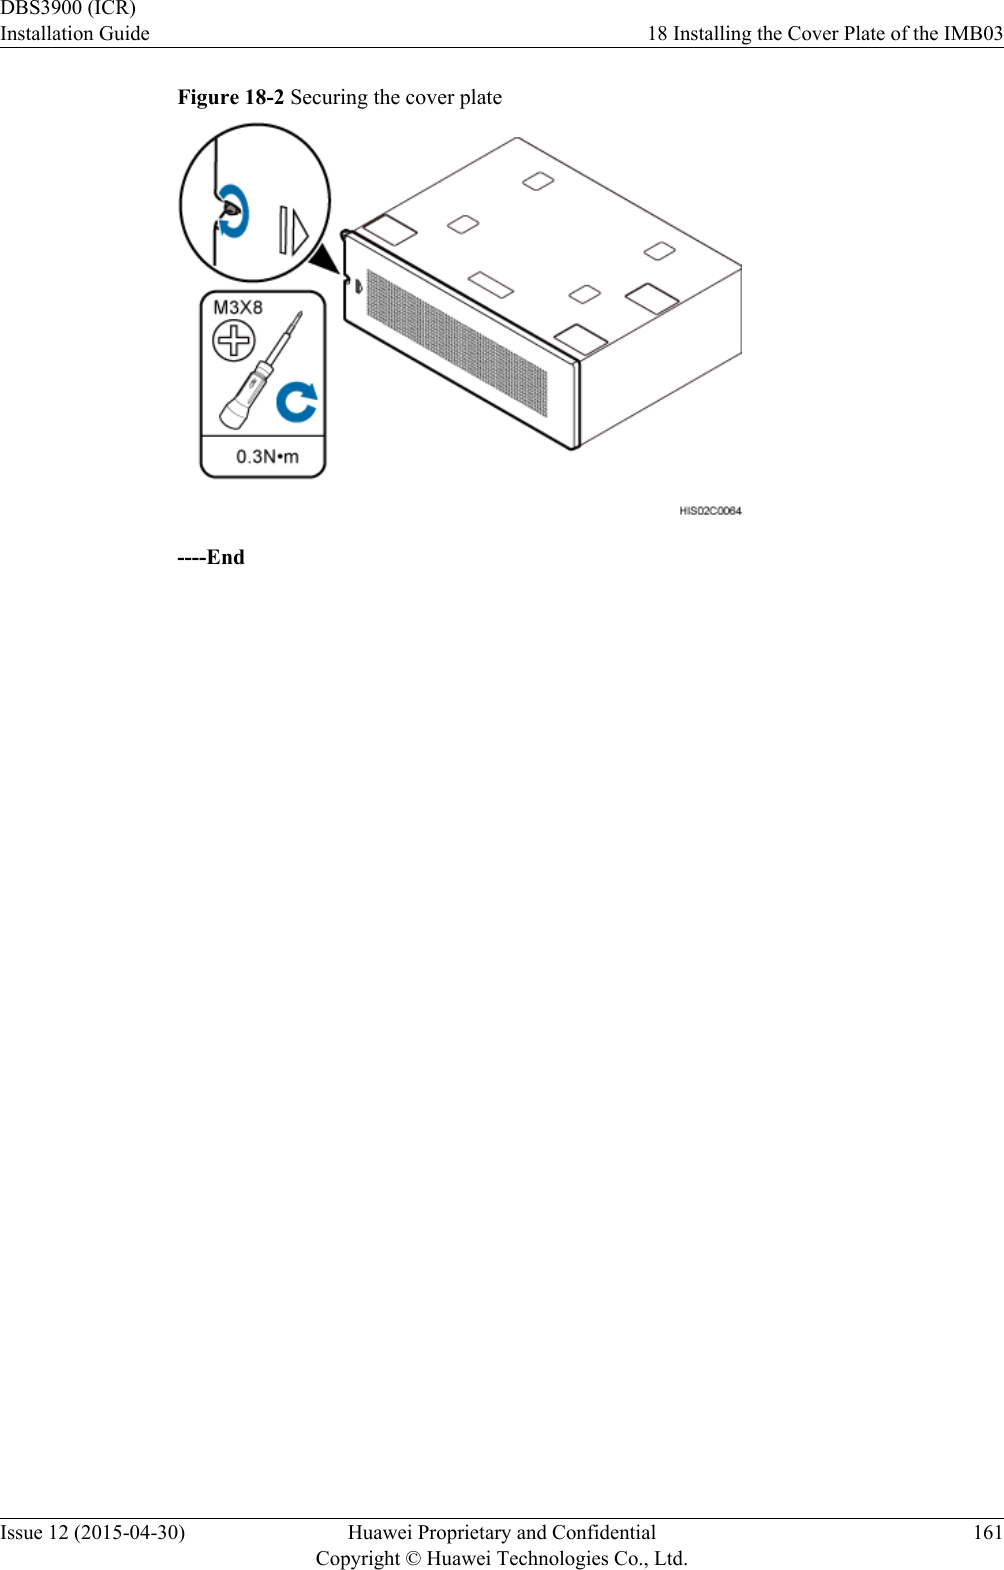 Figure 18-2 Securing the cover plate----EndDBS3900 (ICR)Installation Guide 18 Installing the Cover Plate of the IMB03Issue 12 (2015-04-30) Huawei Proprietary and ConfidentialCopyright © Huawei Technologies Co., Ltd.161